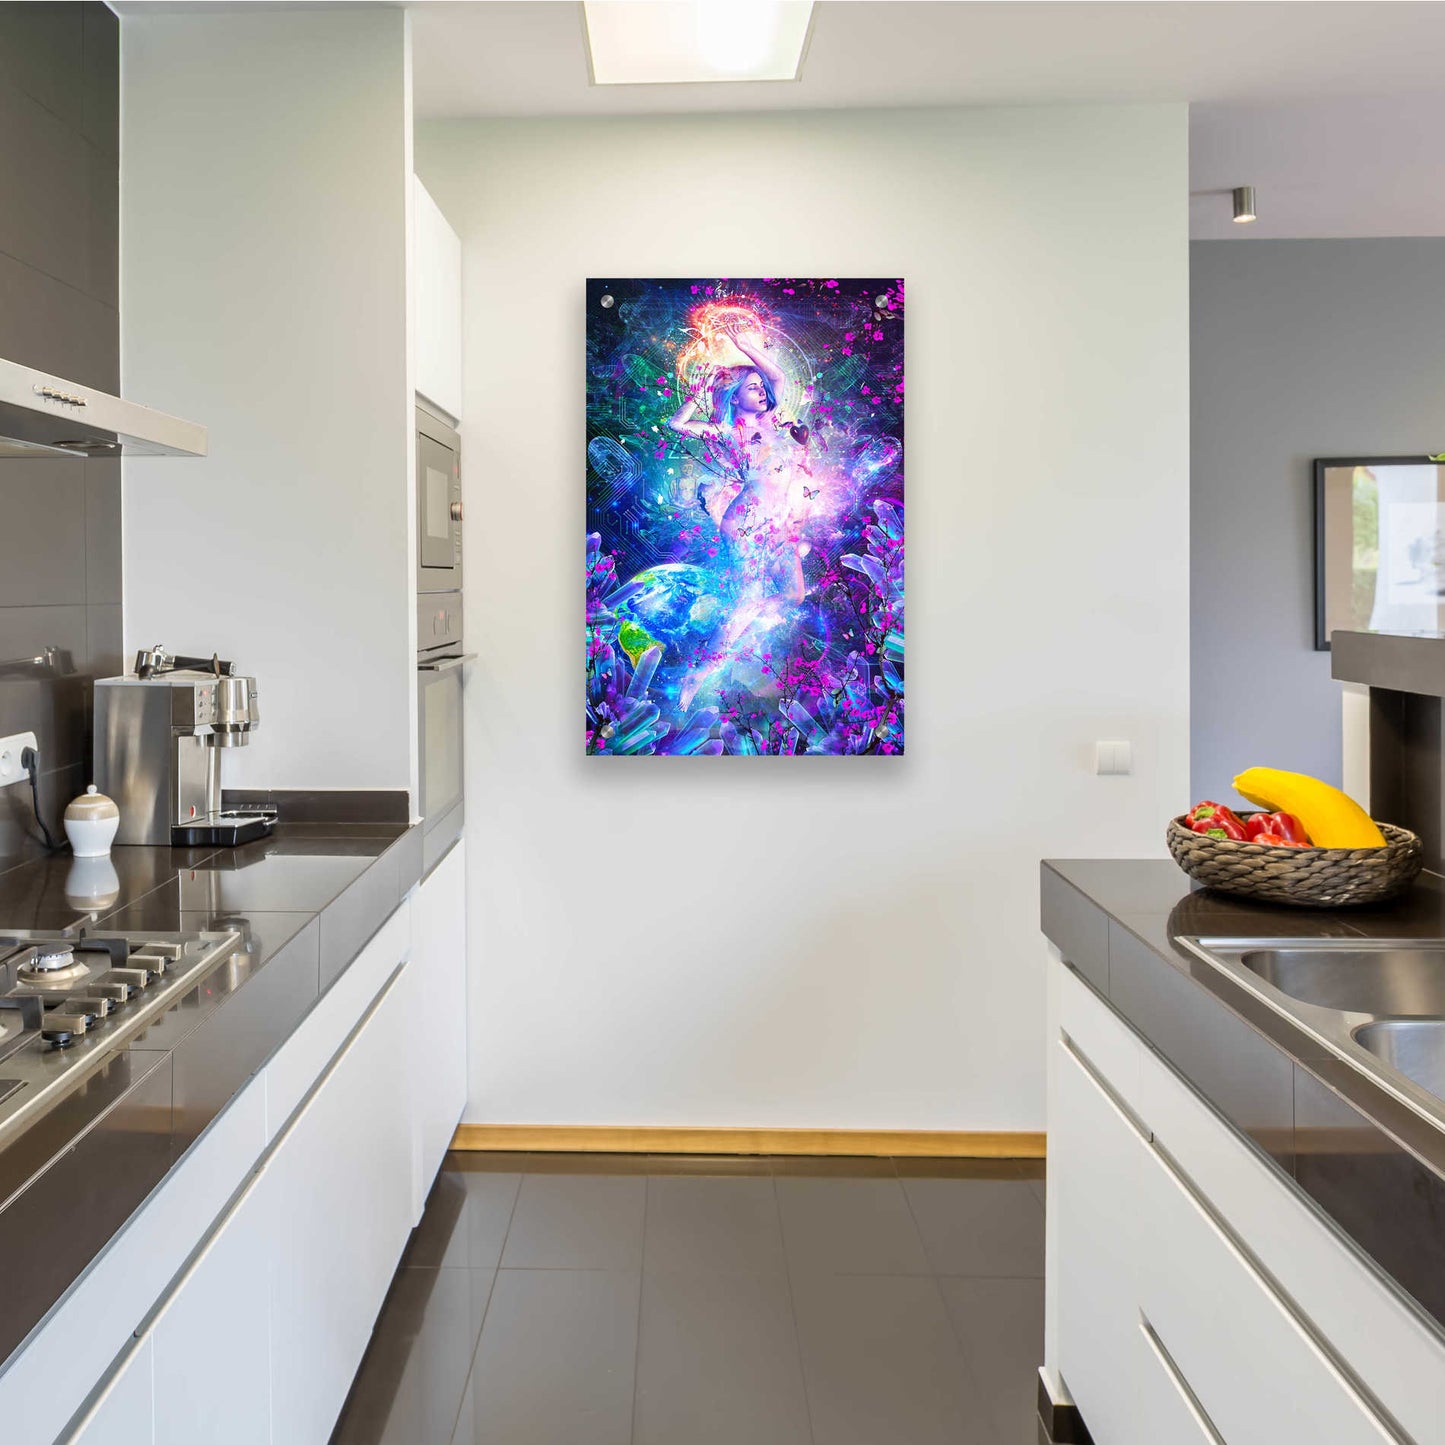 Epic Art 'Encounter With The Sublime' by Cameron Gray, Acrylic Glass Wall Art,24x36